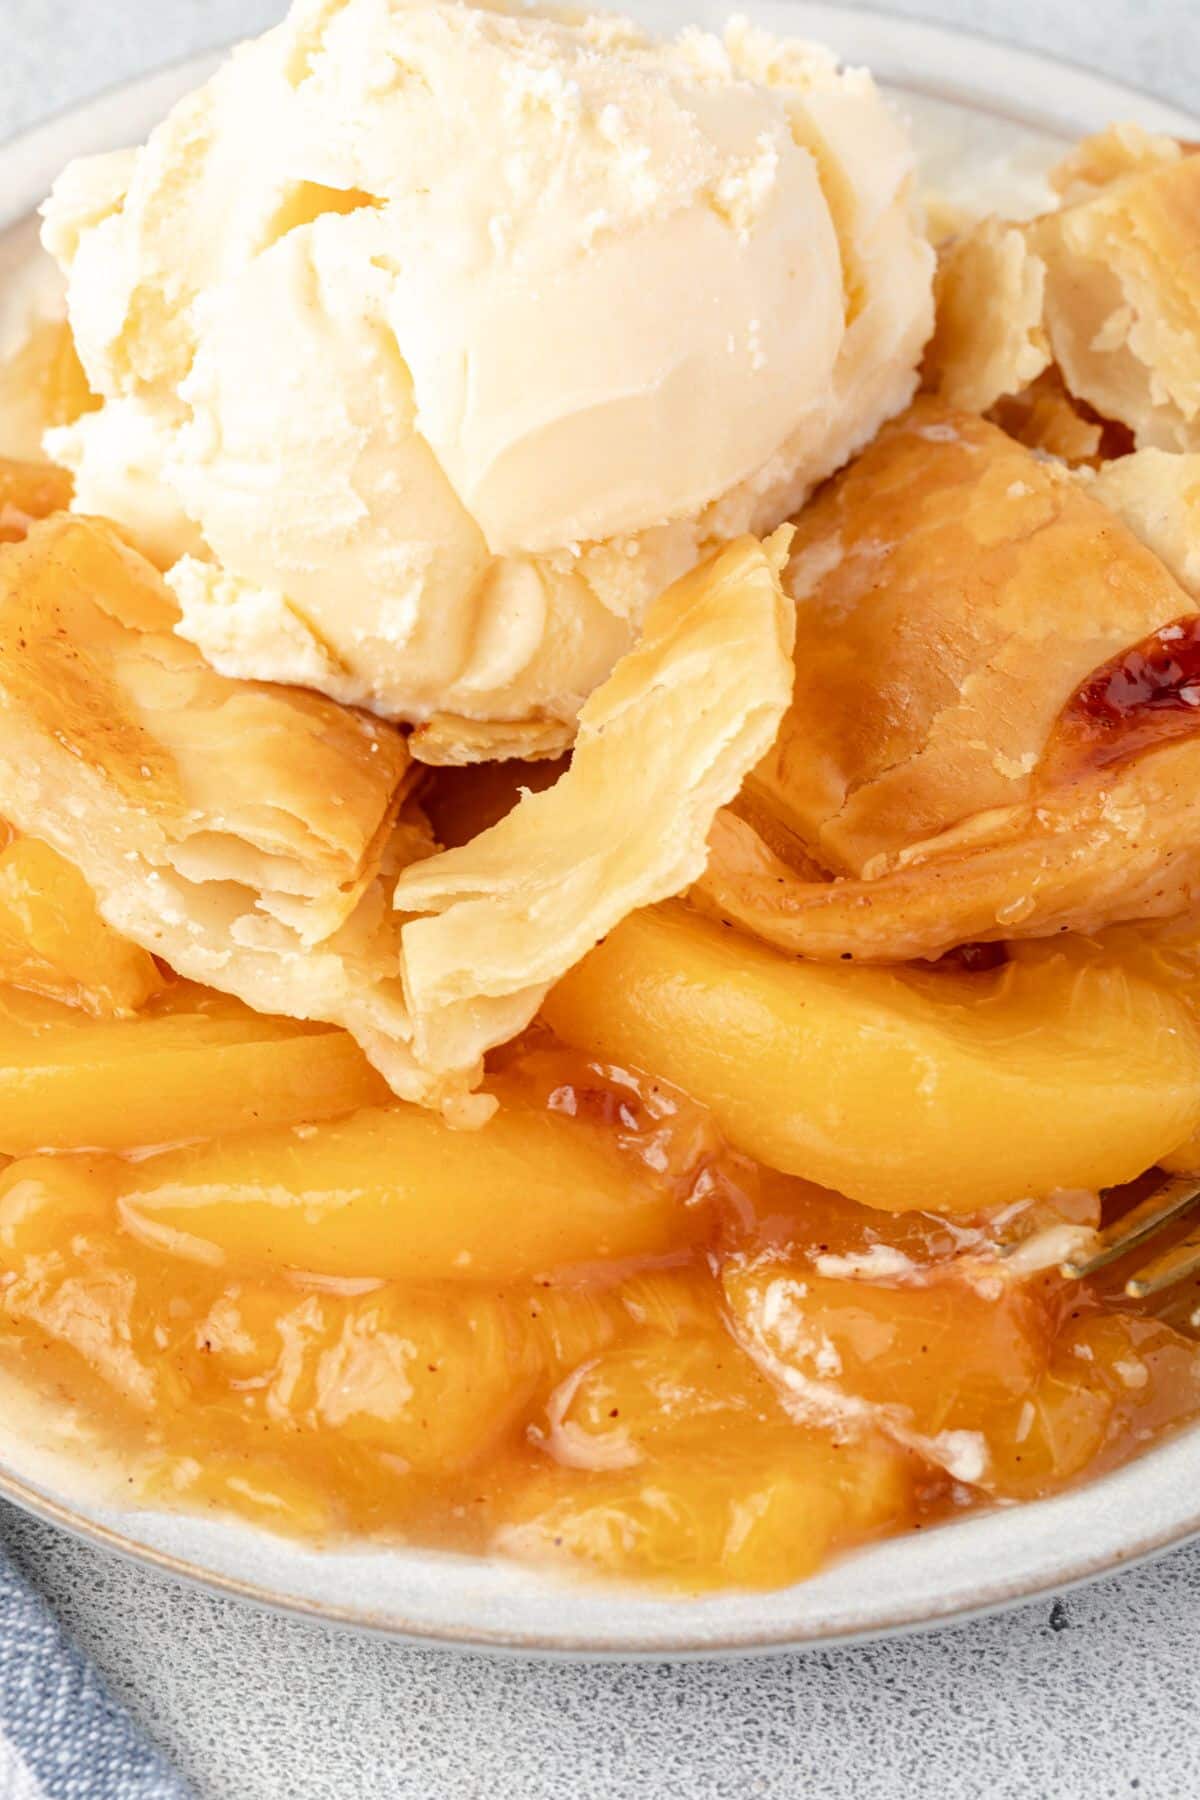 This is a photo of a serving of peach cobbler with a scoop of vanilla ice cream on top.